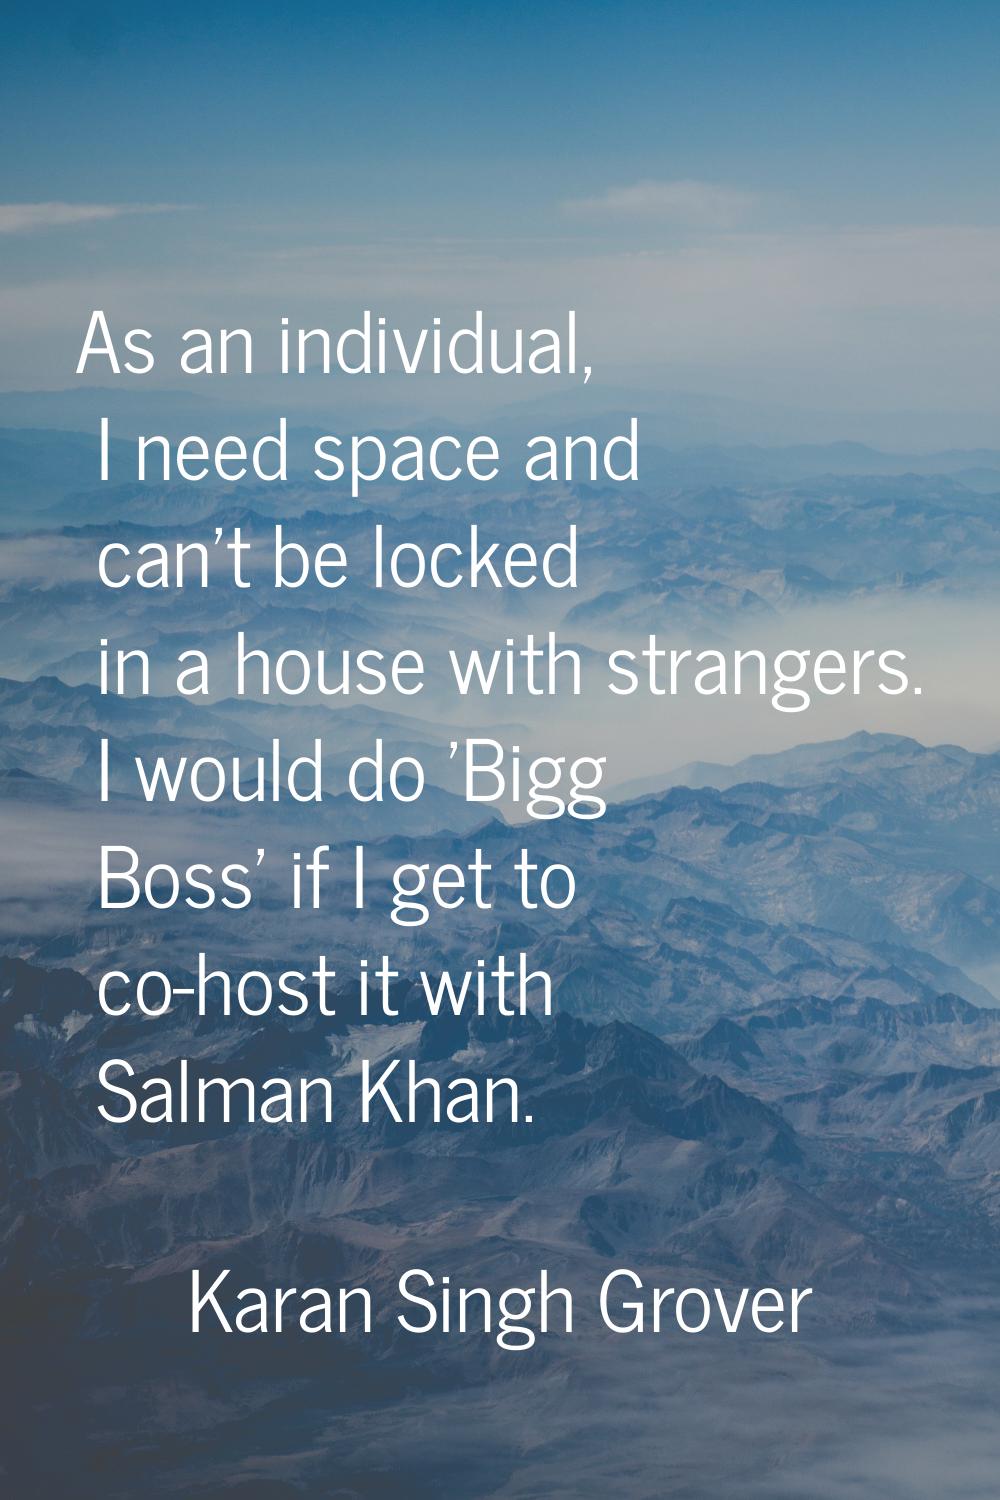 As an individual, I need space and can't be locked in a house with strangers. I would do 'Bigg Boss